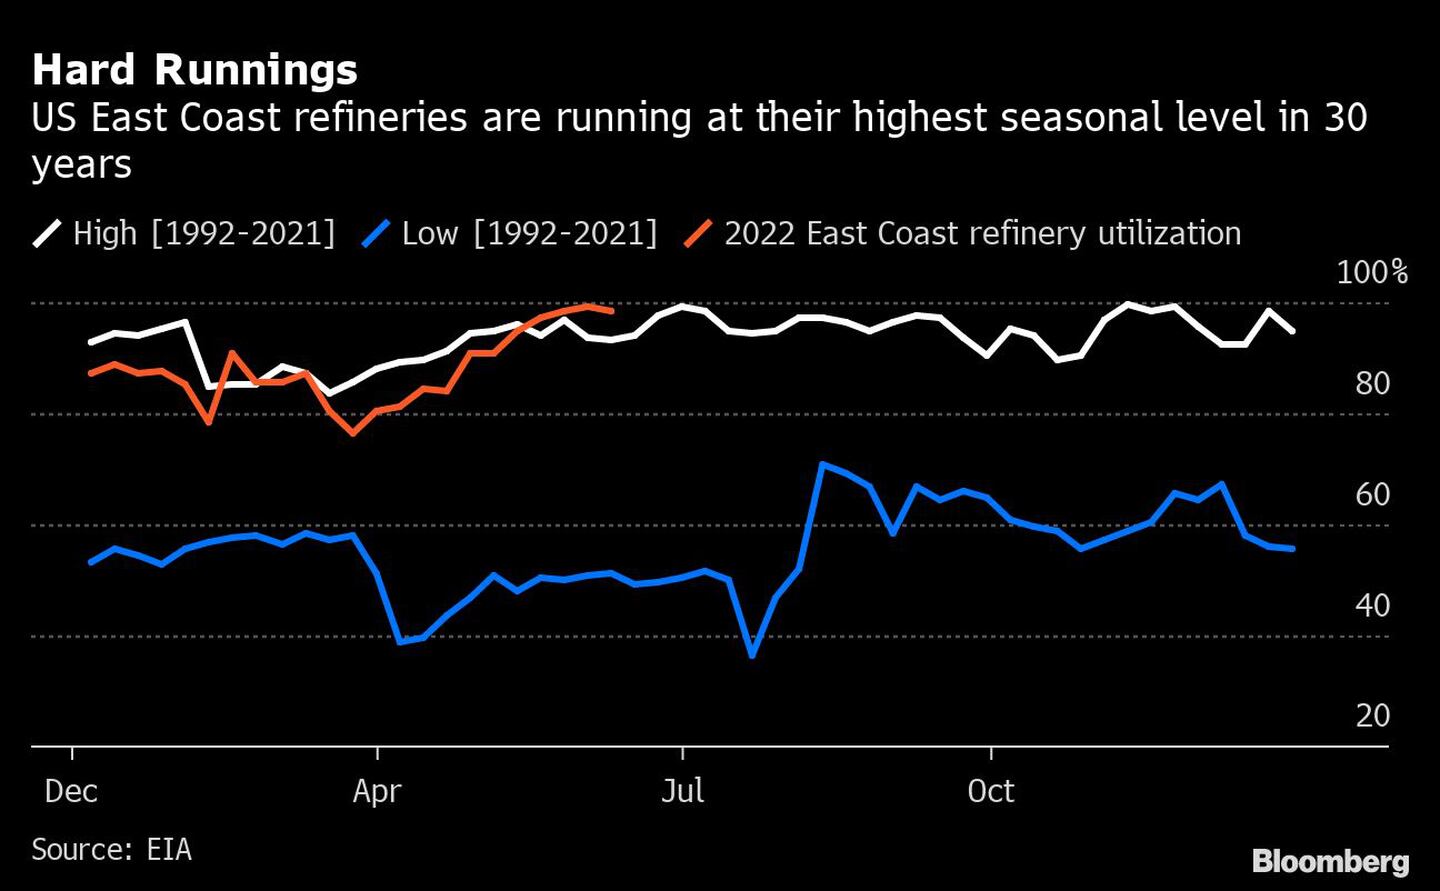 Hard Runnings | US East Coast refineries are running at their highest seasonal level in 30 yearsdfd